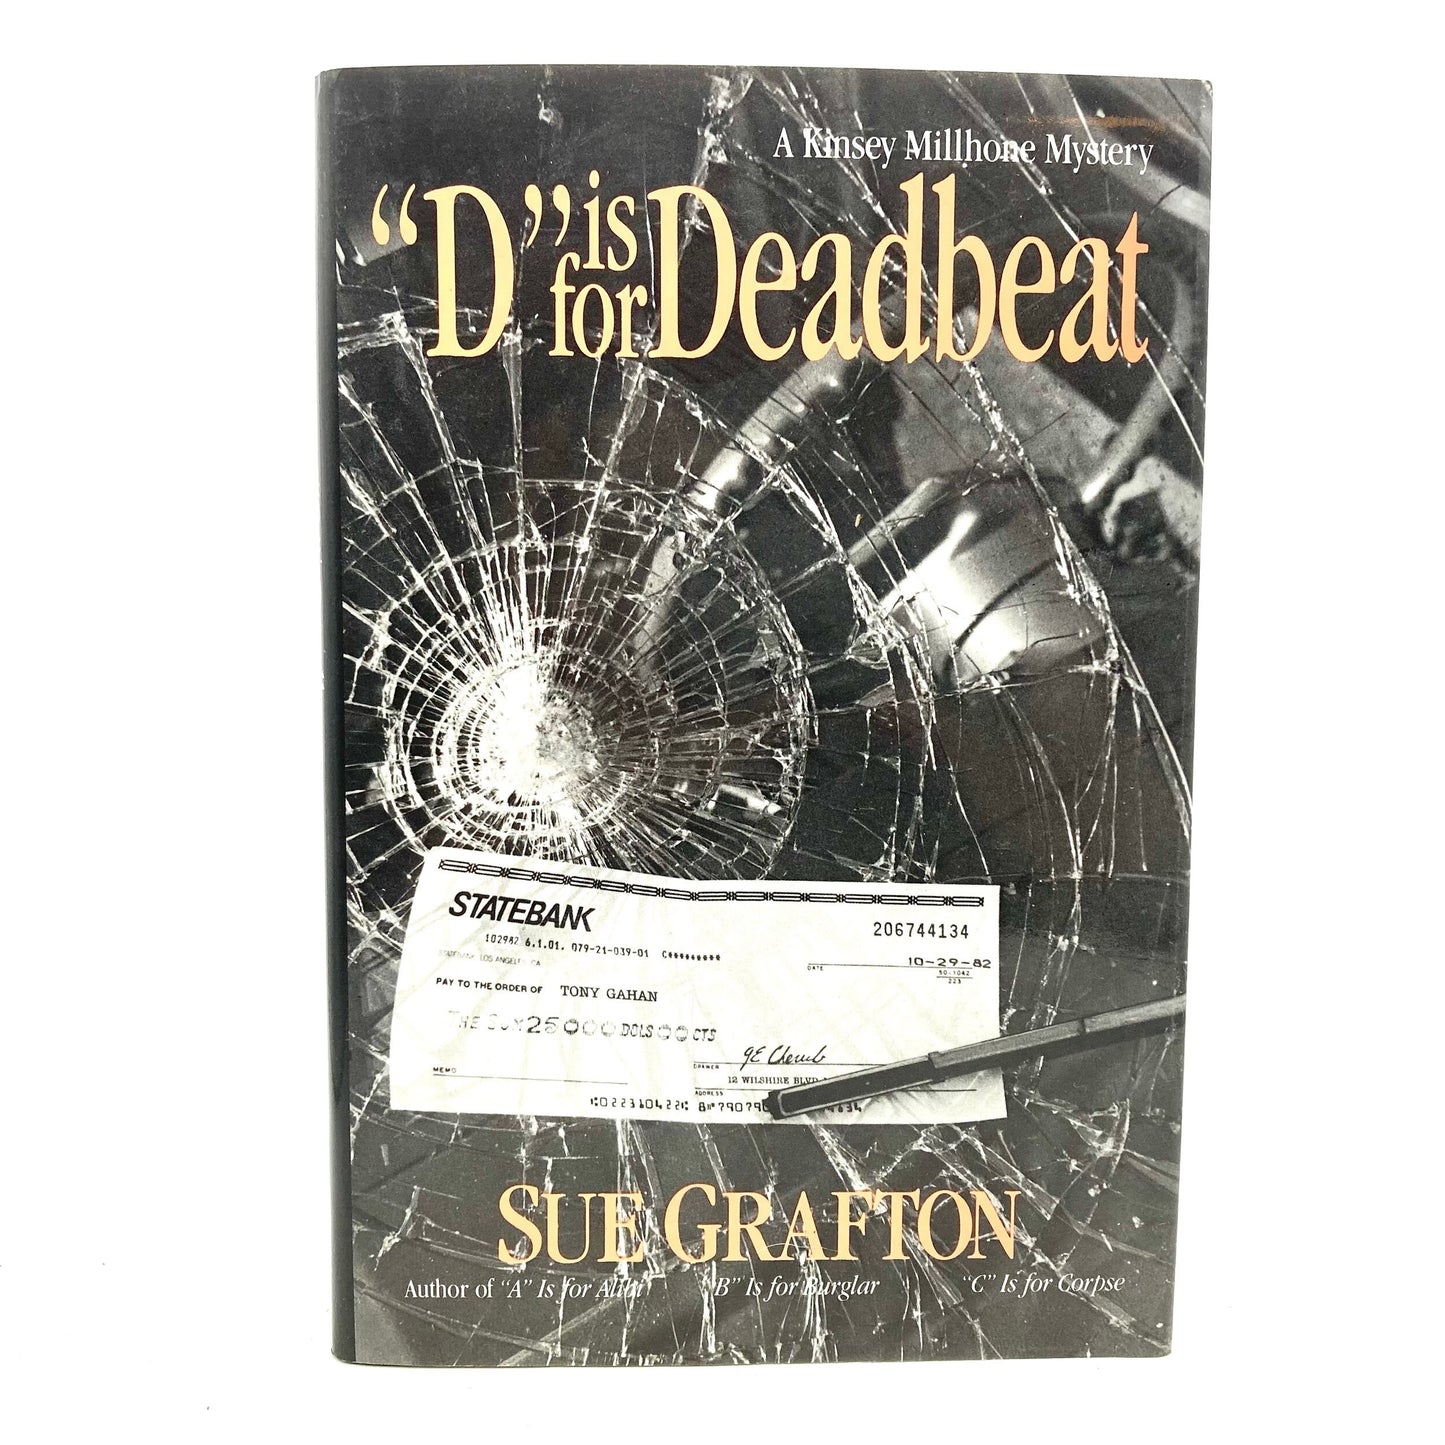 GRAFTON, Sue "D is for Deadbeat" [Henry Holt, 1987] (Signed) - Buzz Bookstore